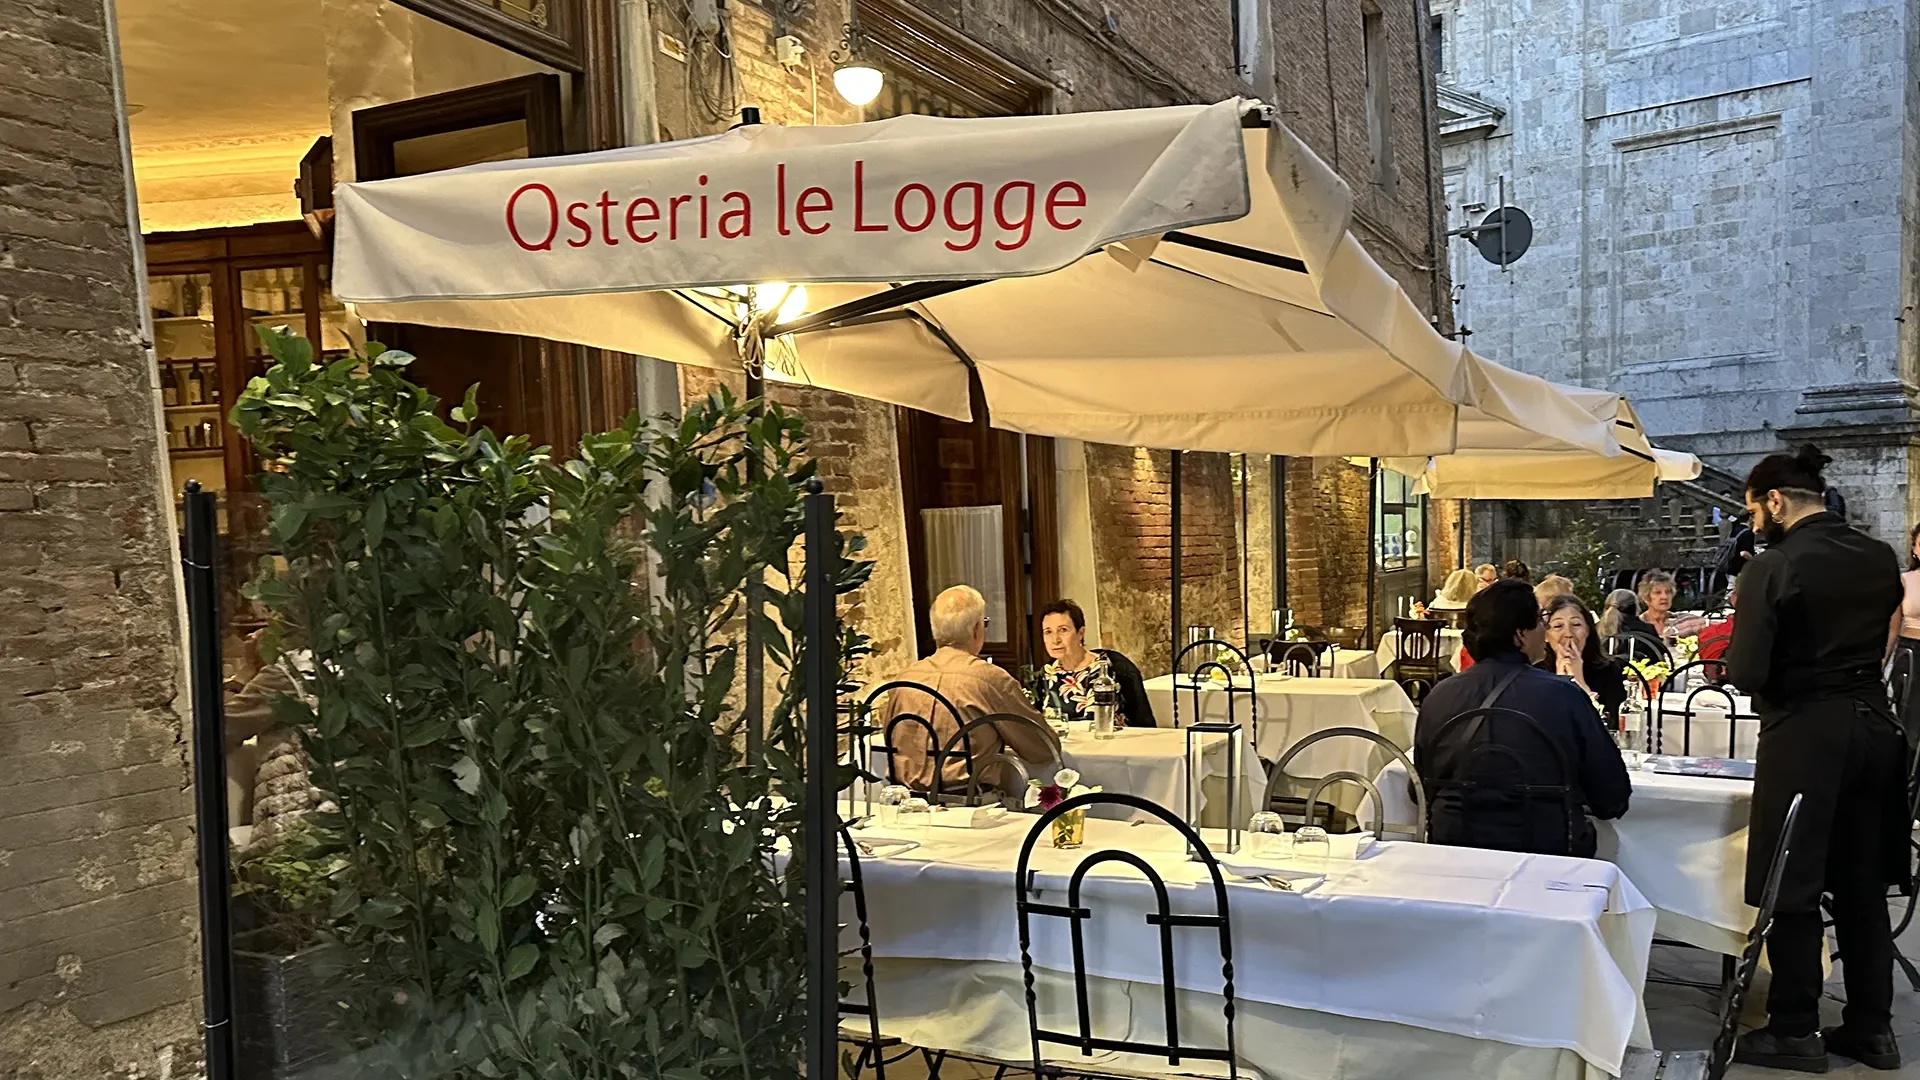 Osteria le Logge features a wonderful outside terrace, perfect for dining on a warm autumn evening.